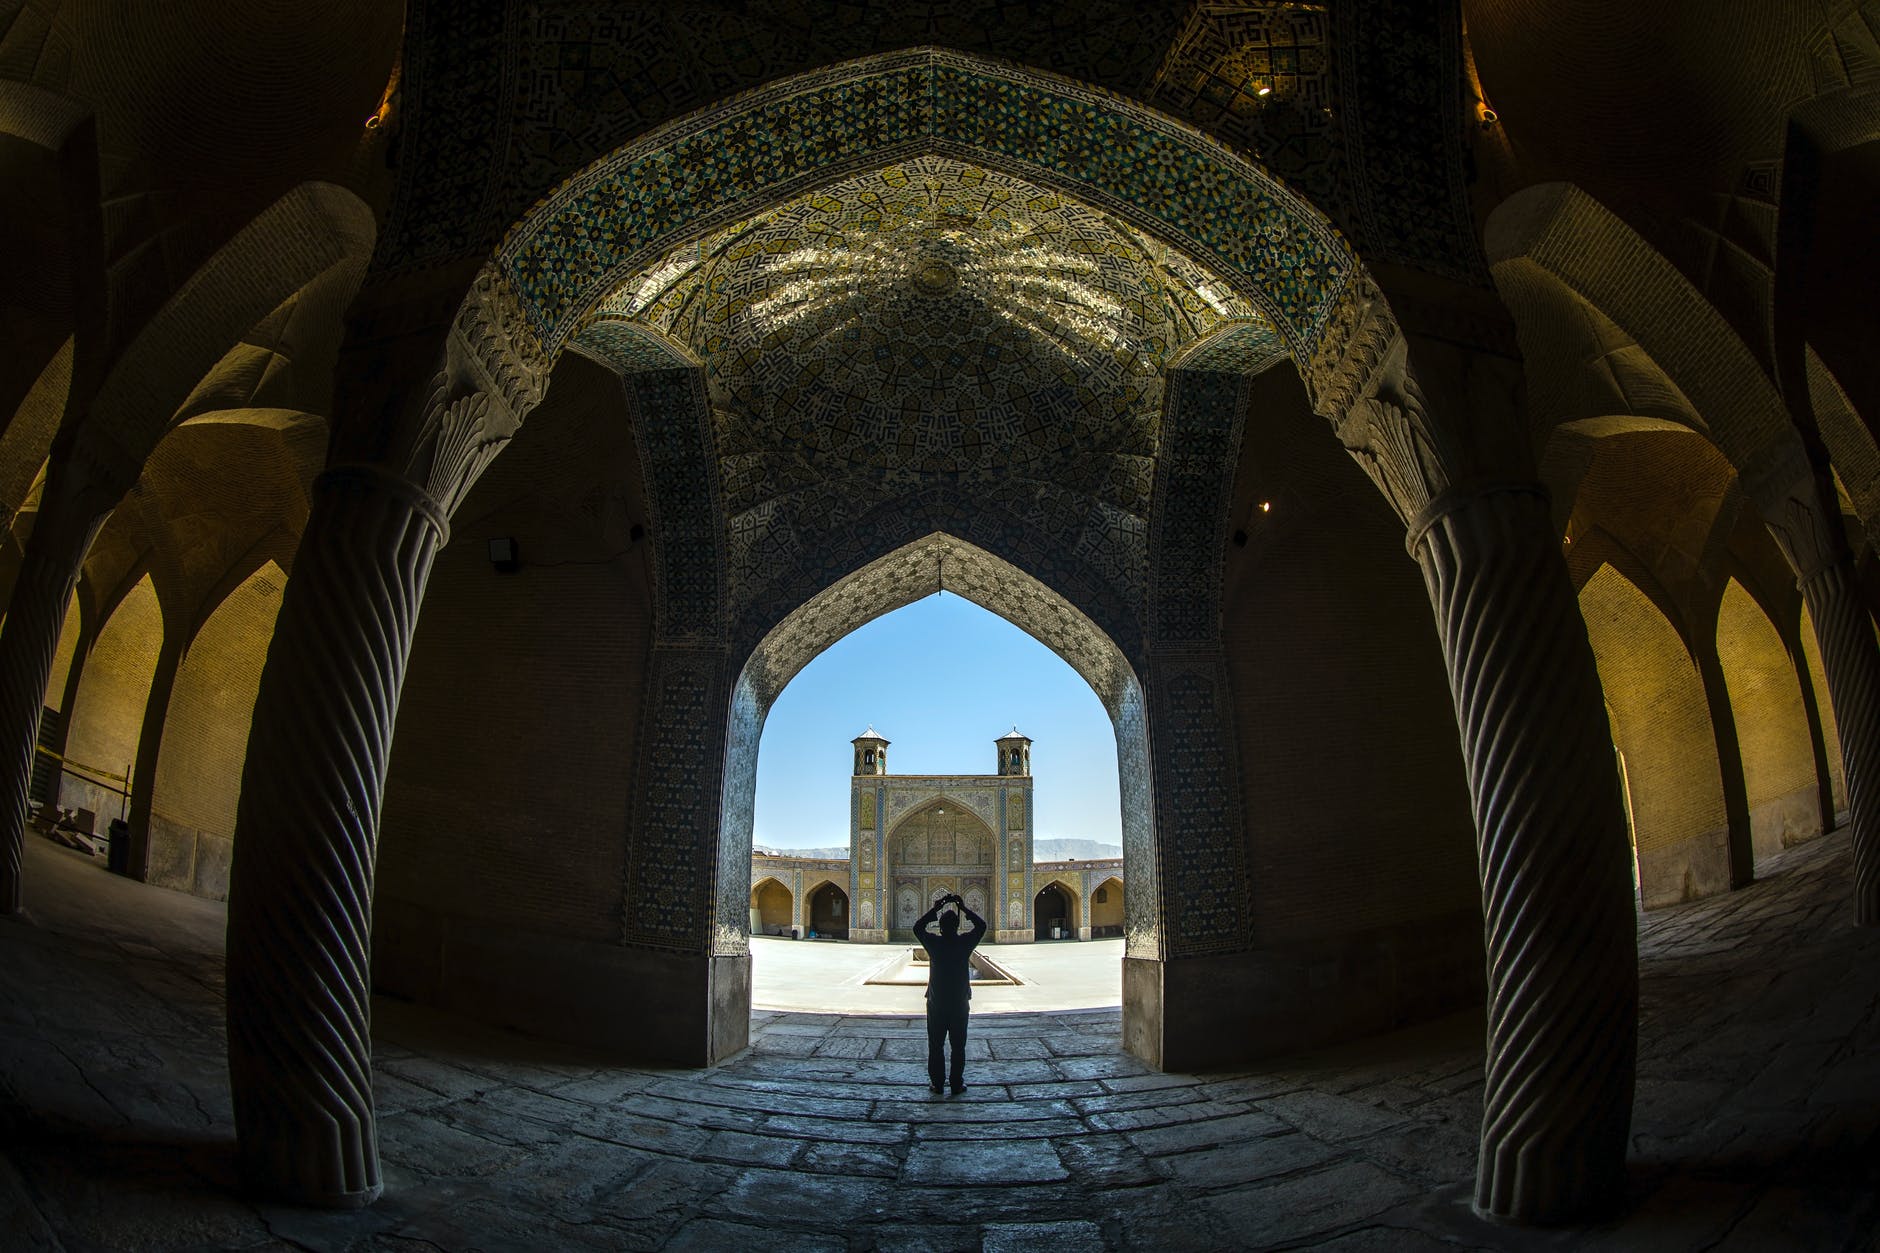 fisheye shot of a person inside a building with columns and ornate ceiling